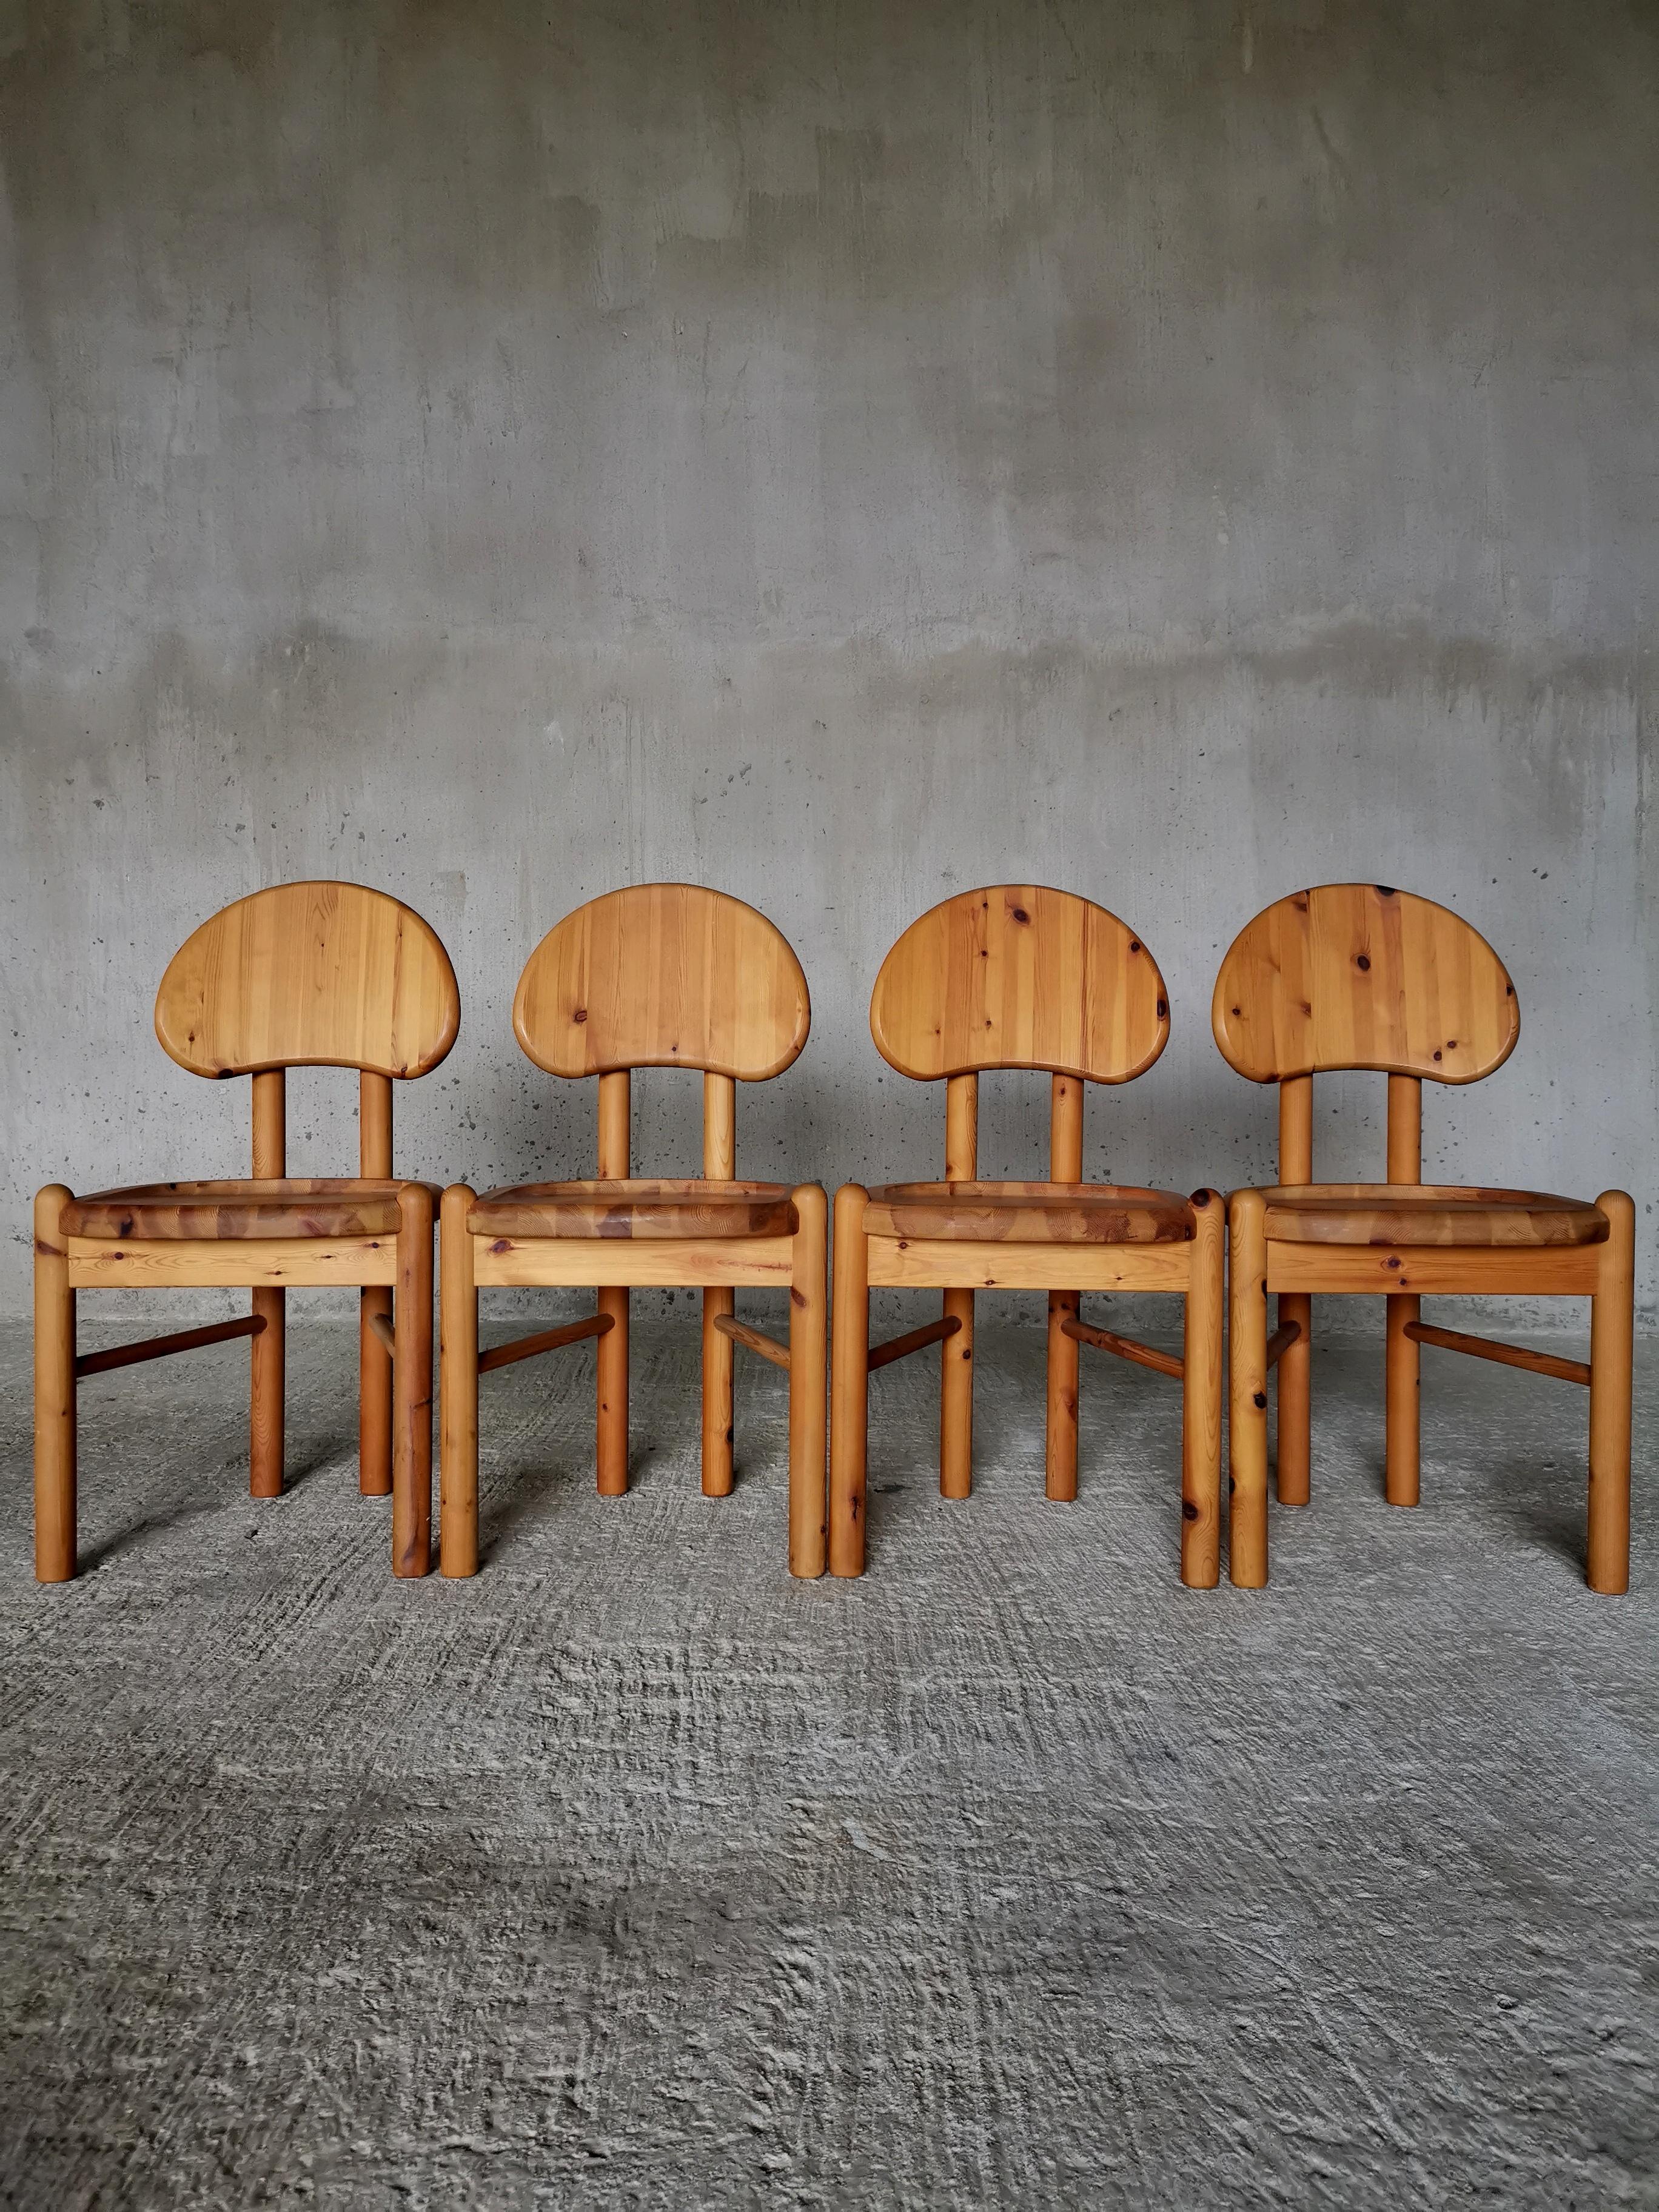 Set of 4 dining chairs in solid pine, style of Rainer Daumiller. 
Made in Denmark in the 1970s, these chairs has many fine construction and design details recognizable to the work of a midcentury Danish cabinetmaker.
Details seen in the shape of the